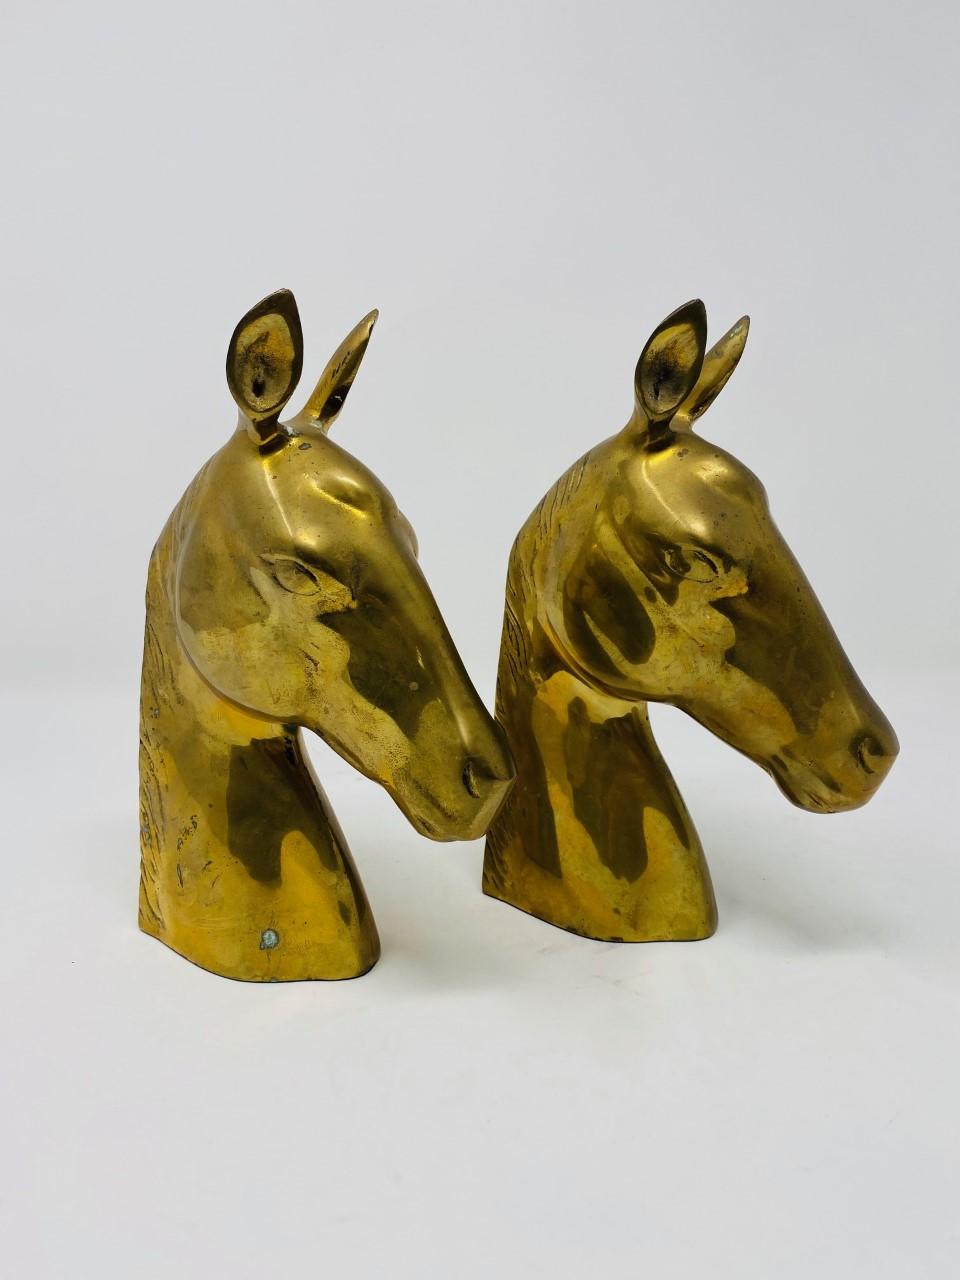 Striking pair of vintage brass horse head bookends with beautiful patina. The details on the figures evoke elegance and nostalgia. Perfect for your mid-century or Hollywood Regency decor styles. Incredible sculptural renditions that will bring